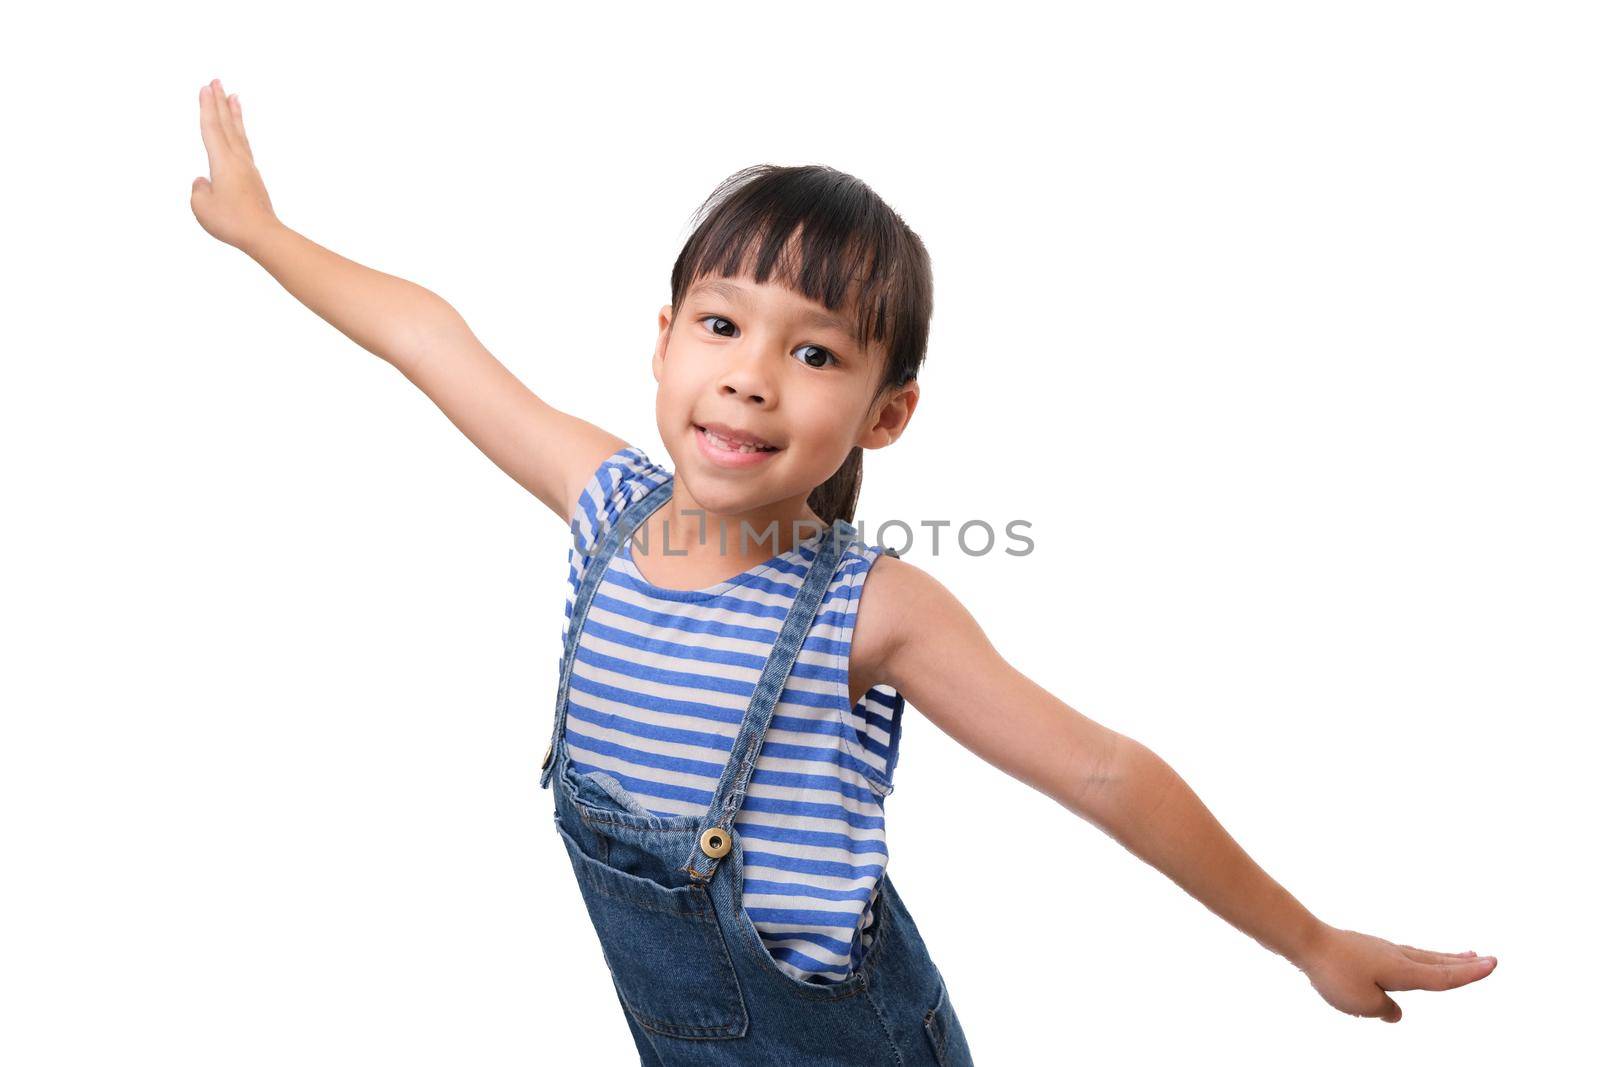 Happy little carefree girl smiling and balancing standing on one leg with her arms outstretched as if flying on a white background. by TEERASAK